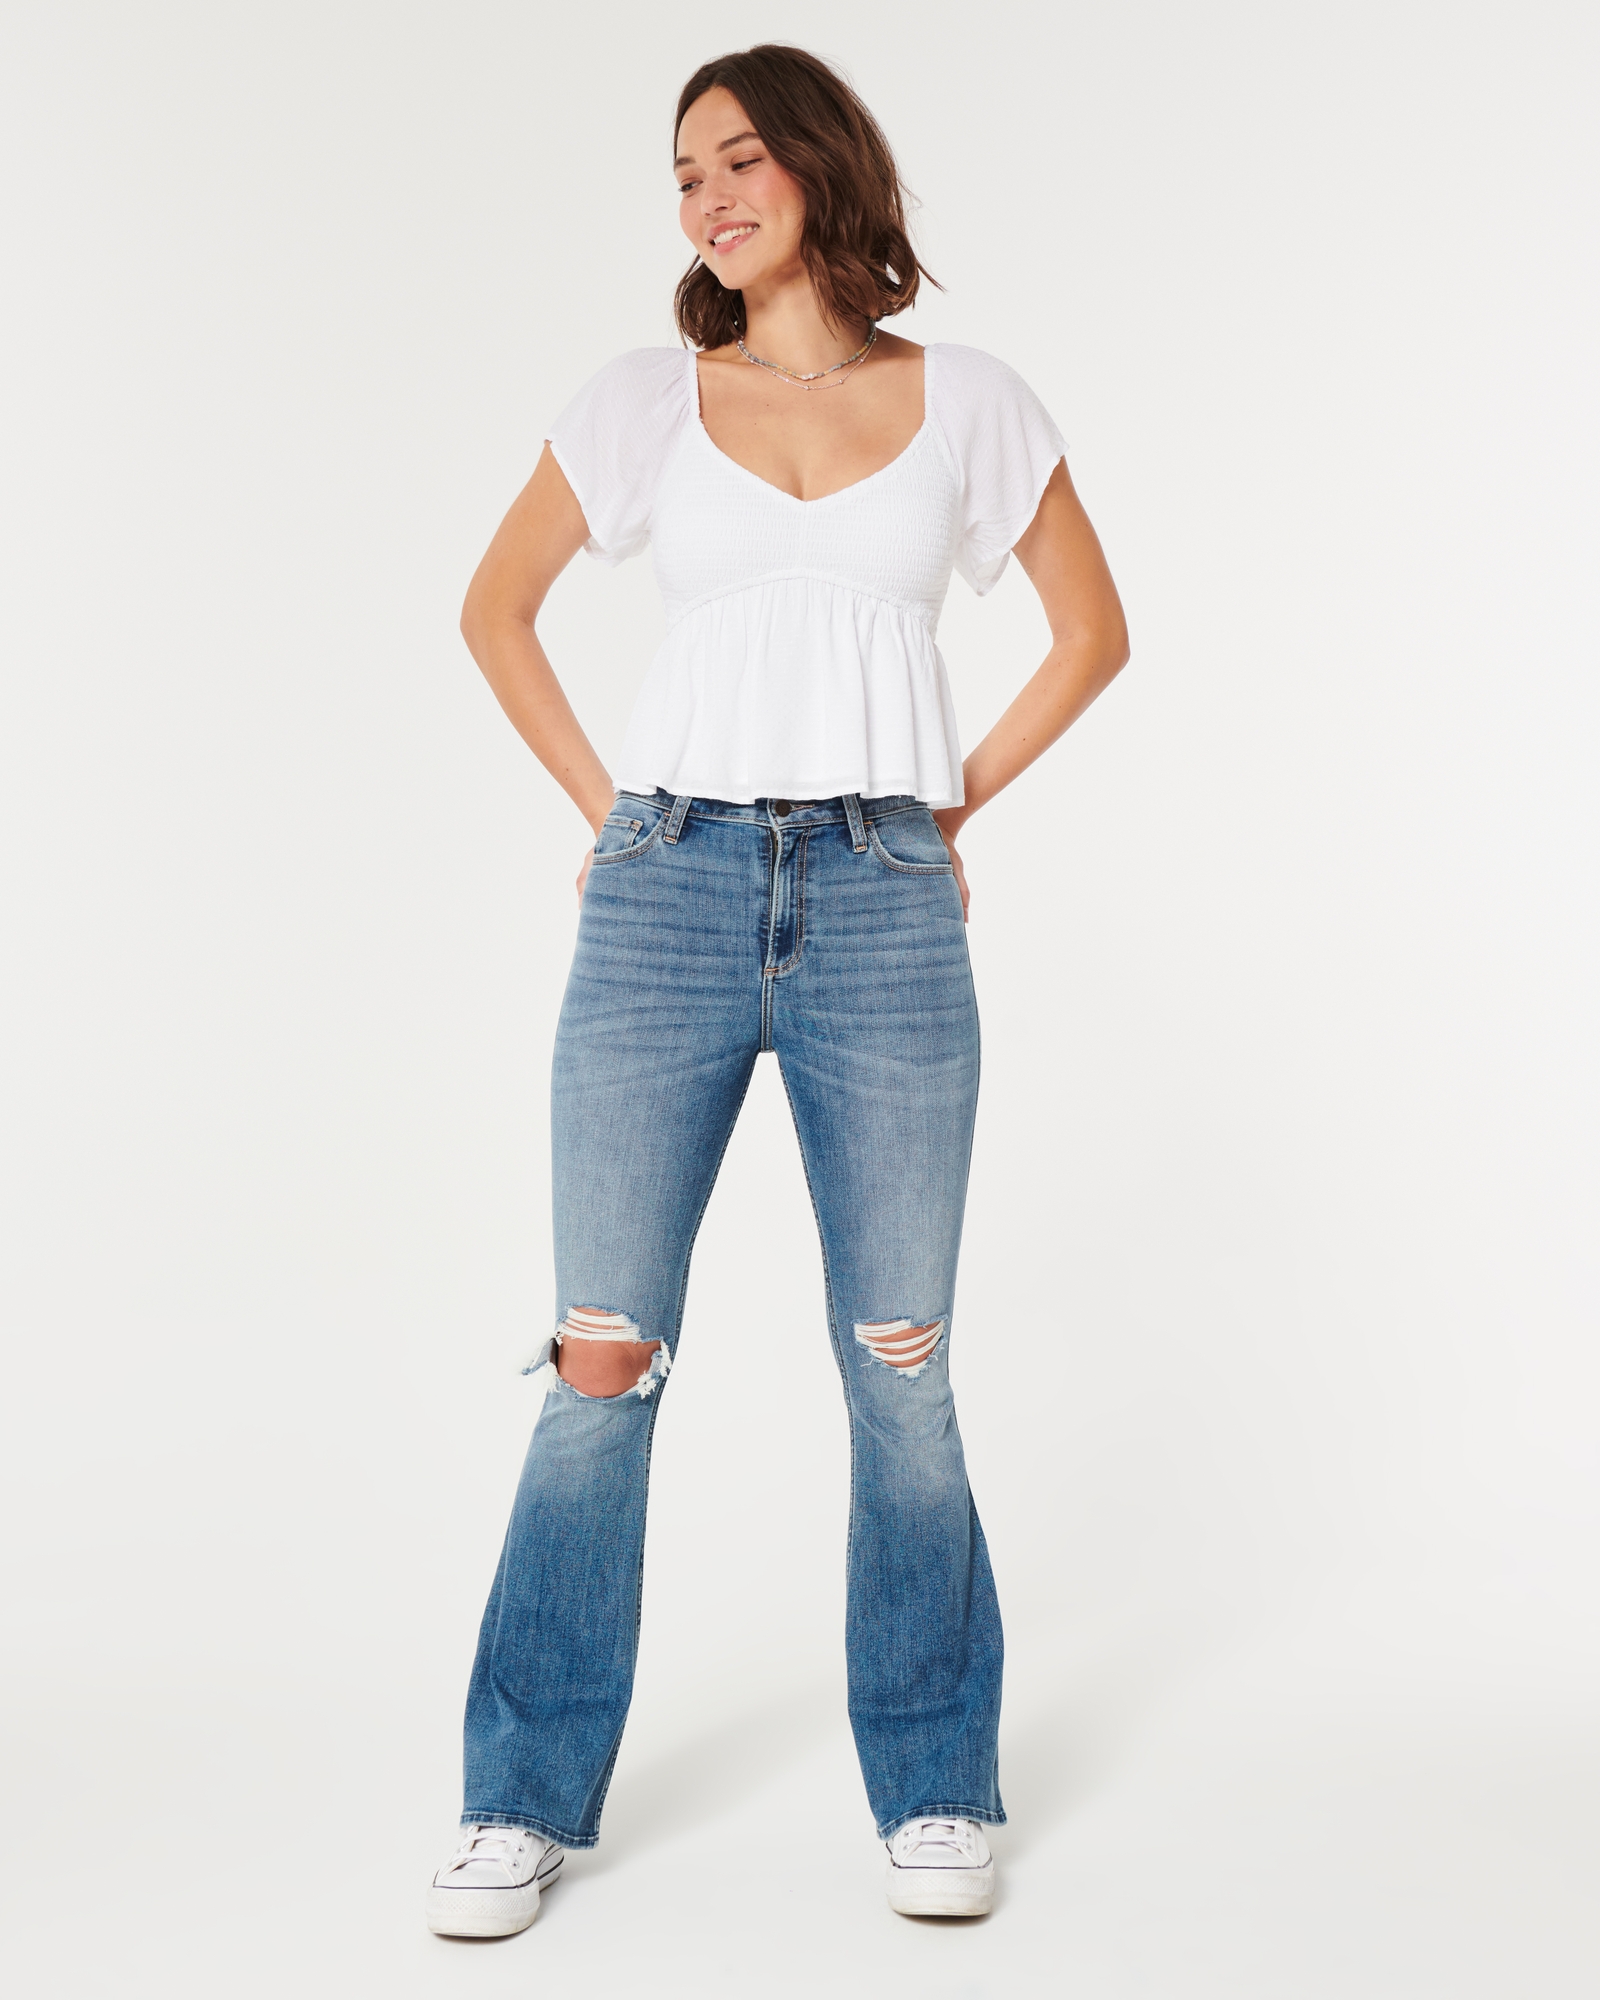 Hollister Curvy High Rise Vintage Flare Jeans Size undefined - $34 New With  Tags - From Heather